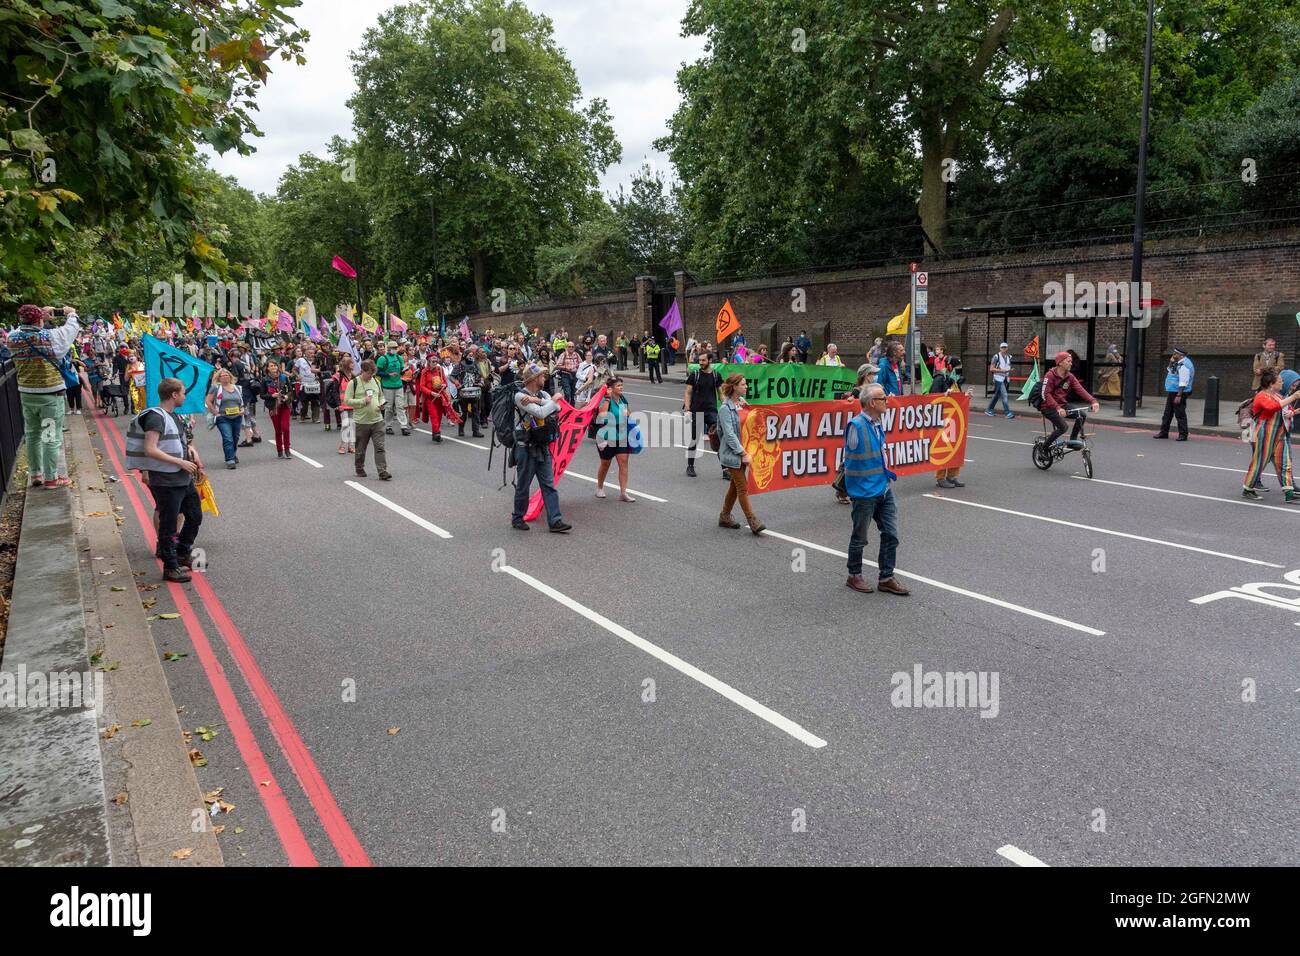 Extinction Rebellion's Impossible Rebellion protest passes Buckingham Palace as they march to the Department for Business Energy and Industrial Strategy under the banner of Stop The Harm protesting against climate change, global warming, and plans to target the root cause of the climate and ecological crisis and to demand the government divest from fossil fuel companies. (Photo by Dave Rushen / SOPA Images/Sipa USA) Stock Photo